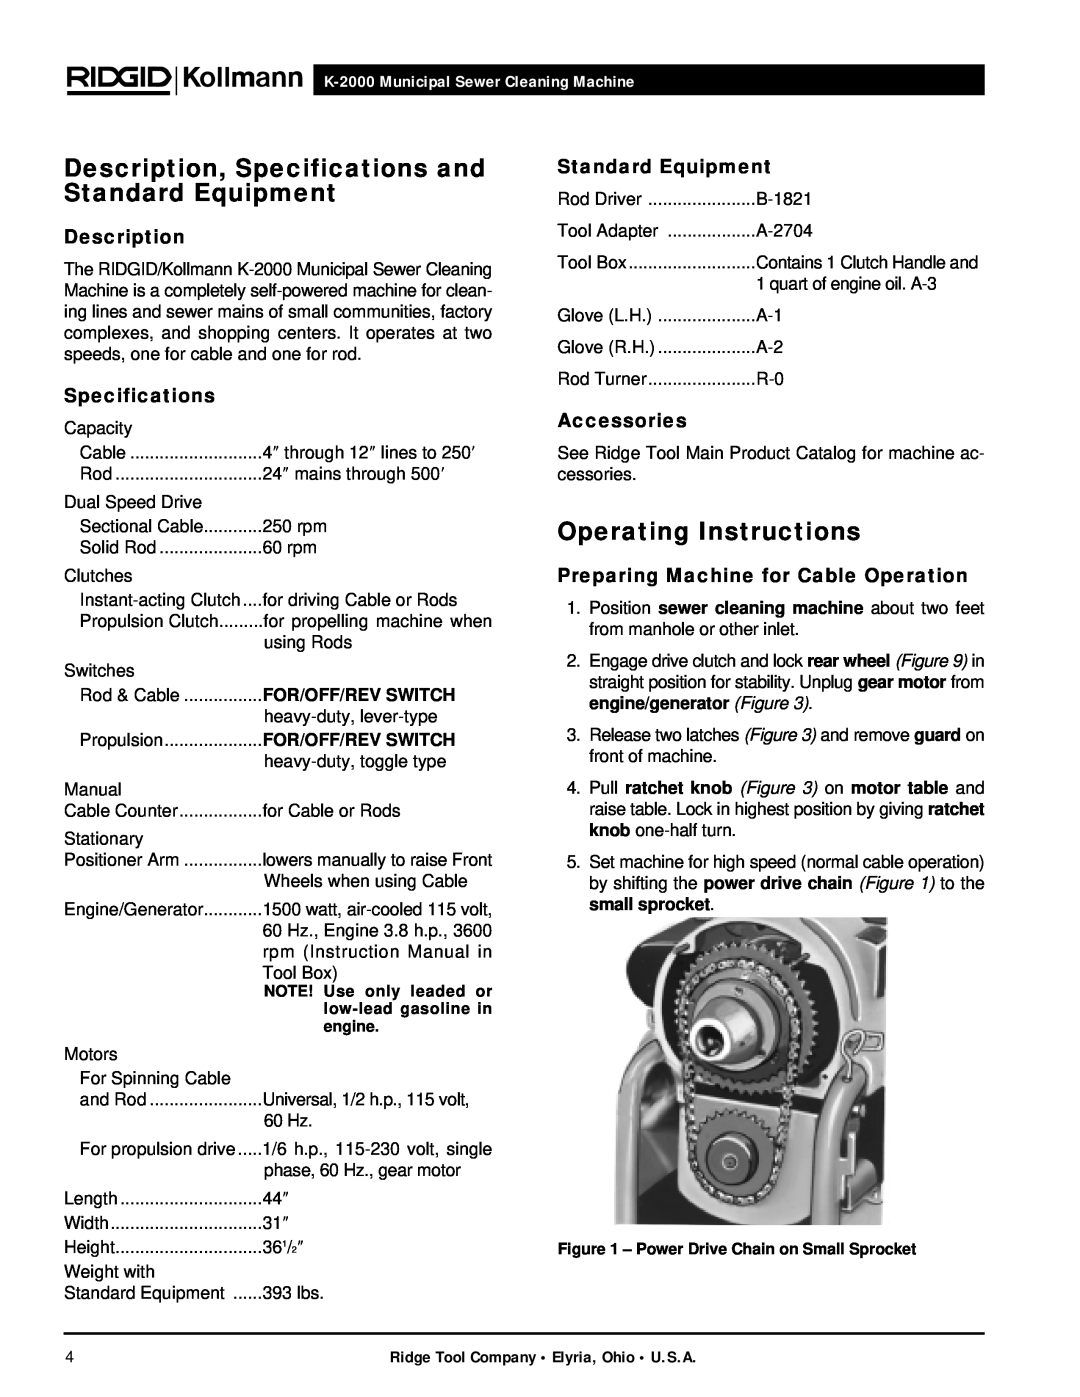 RIDGID K-2000 manual Description, Specifications and Standard Equipment, Operating Instructions, Accessories 